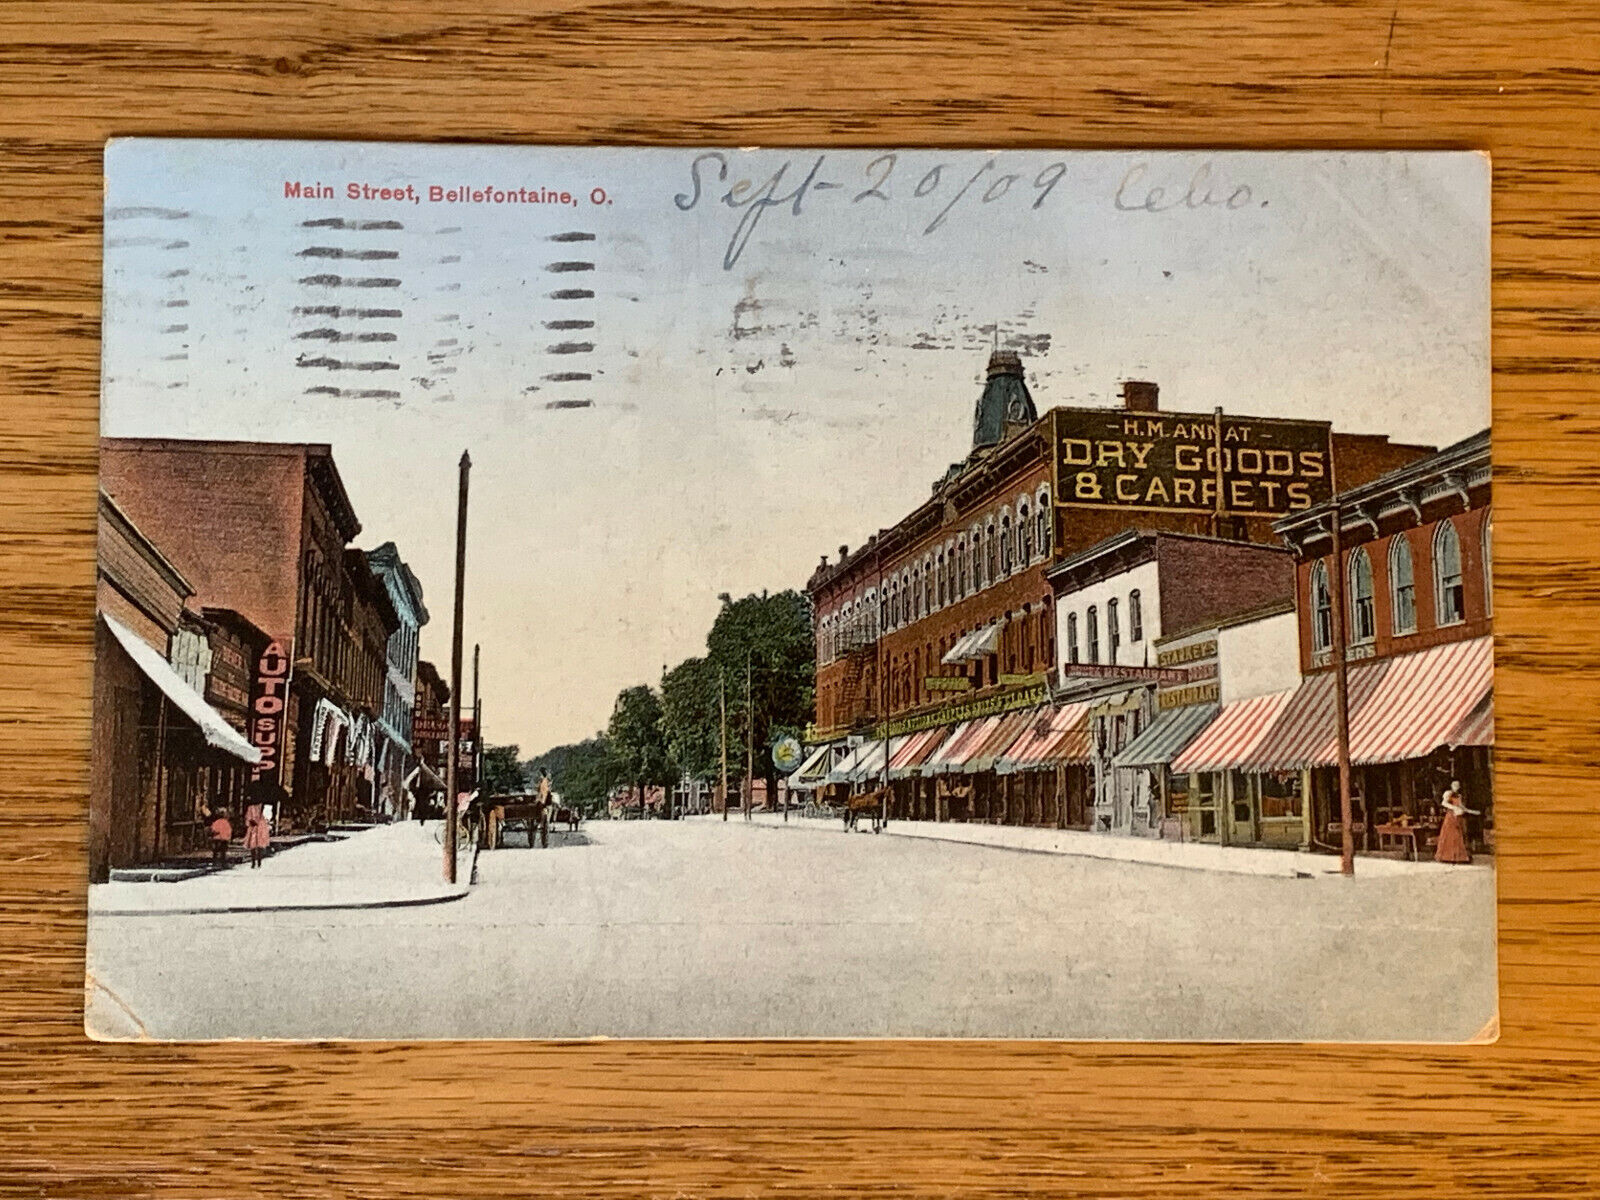 Ohio, OH, Bellefontaine, Main Street, Auto Supply, Dry Goods & Carpets, PM 1909